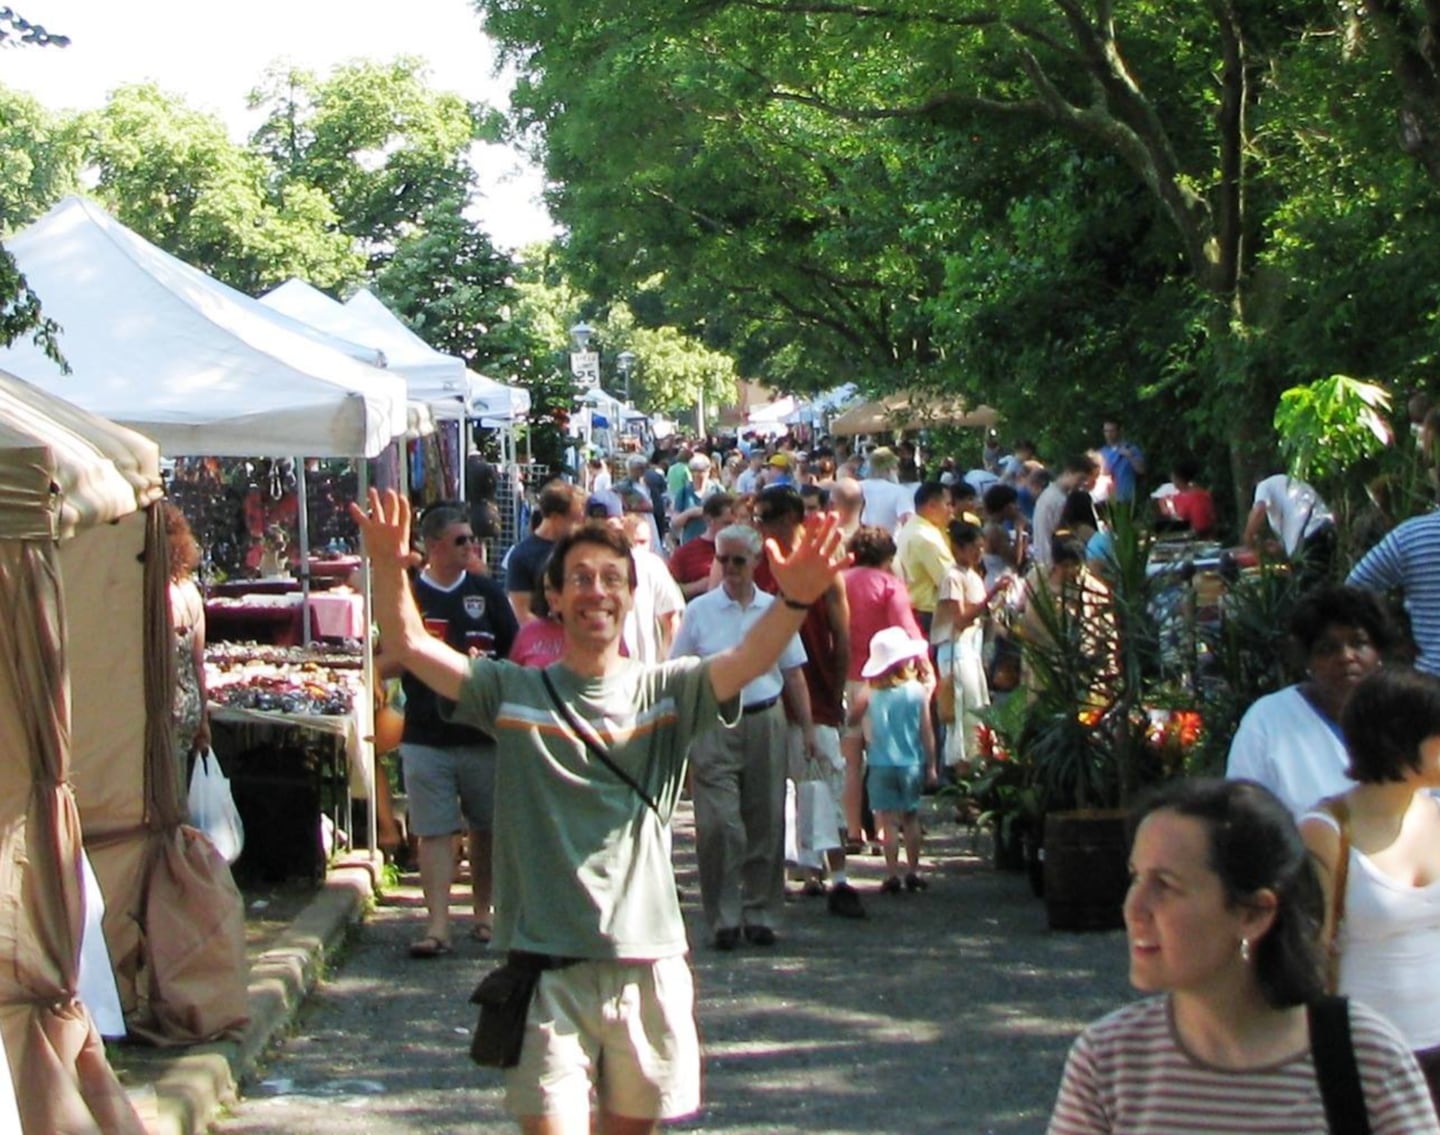 The Charles Village Festival is an annual, two day event that happens in early June.